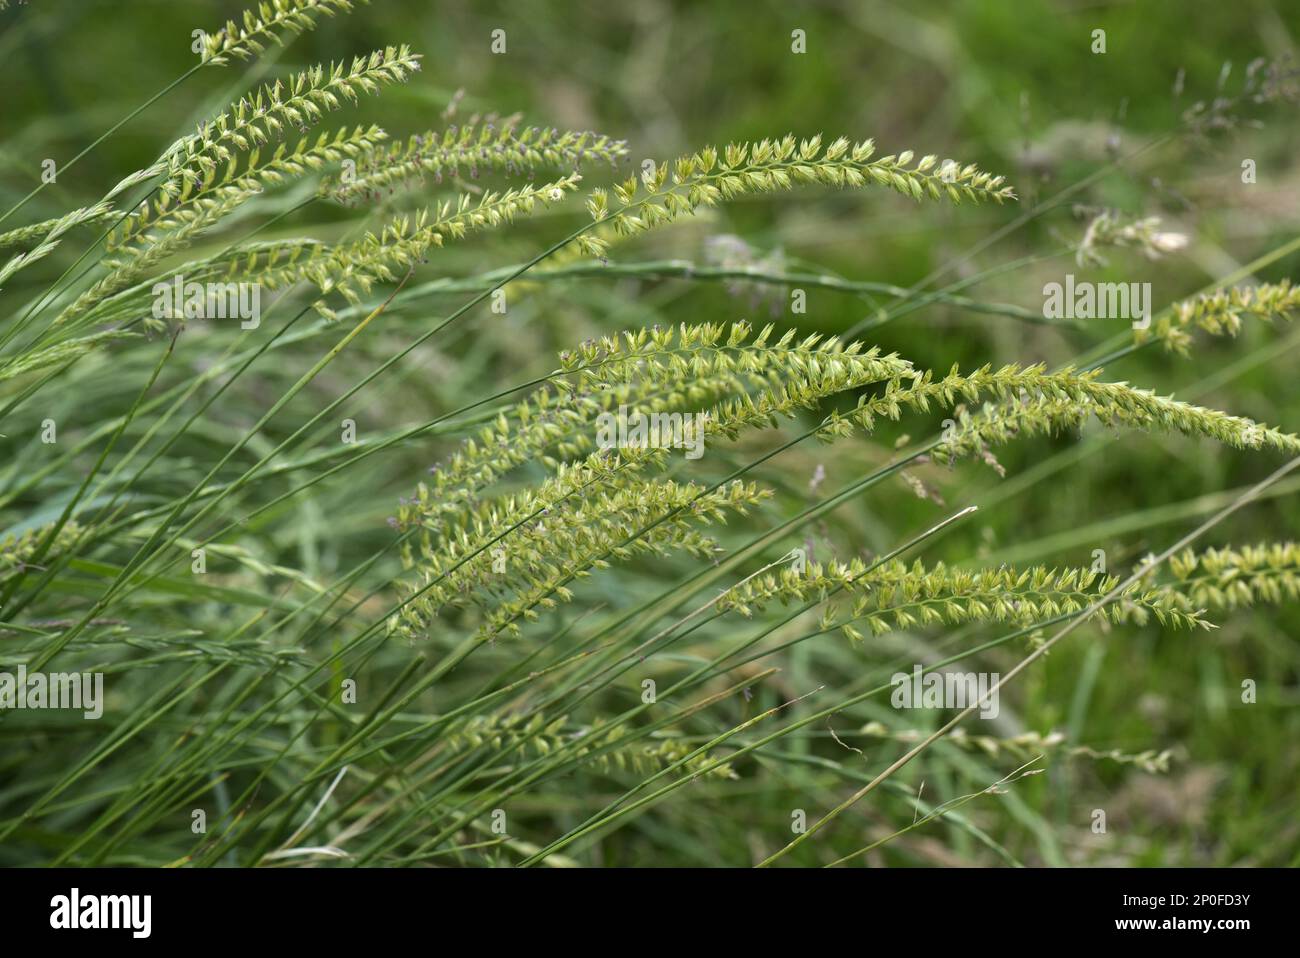 Crested dog's-tail (Cynosurus cristatus) grass, flowering with other grasses Stock Photo